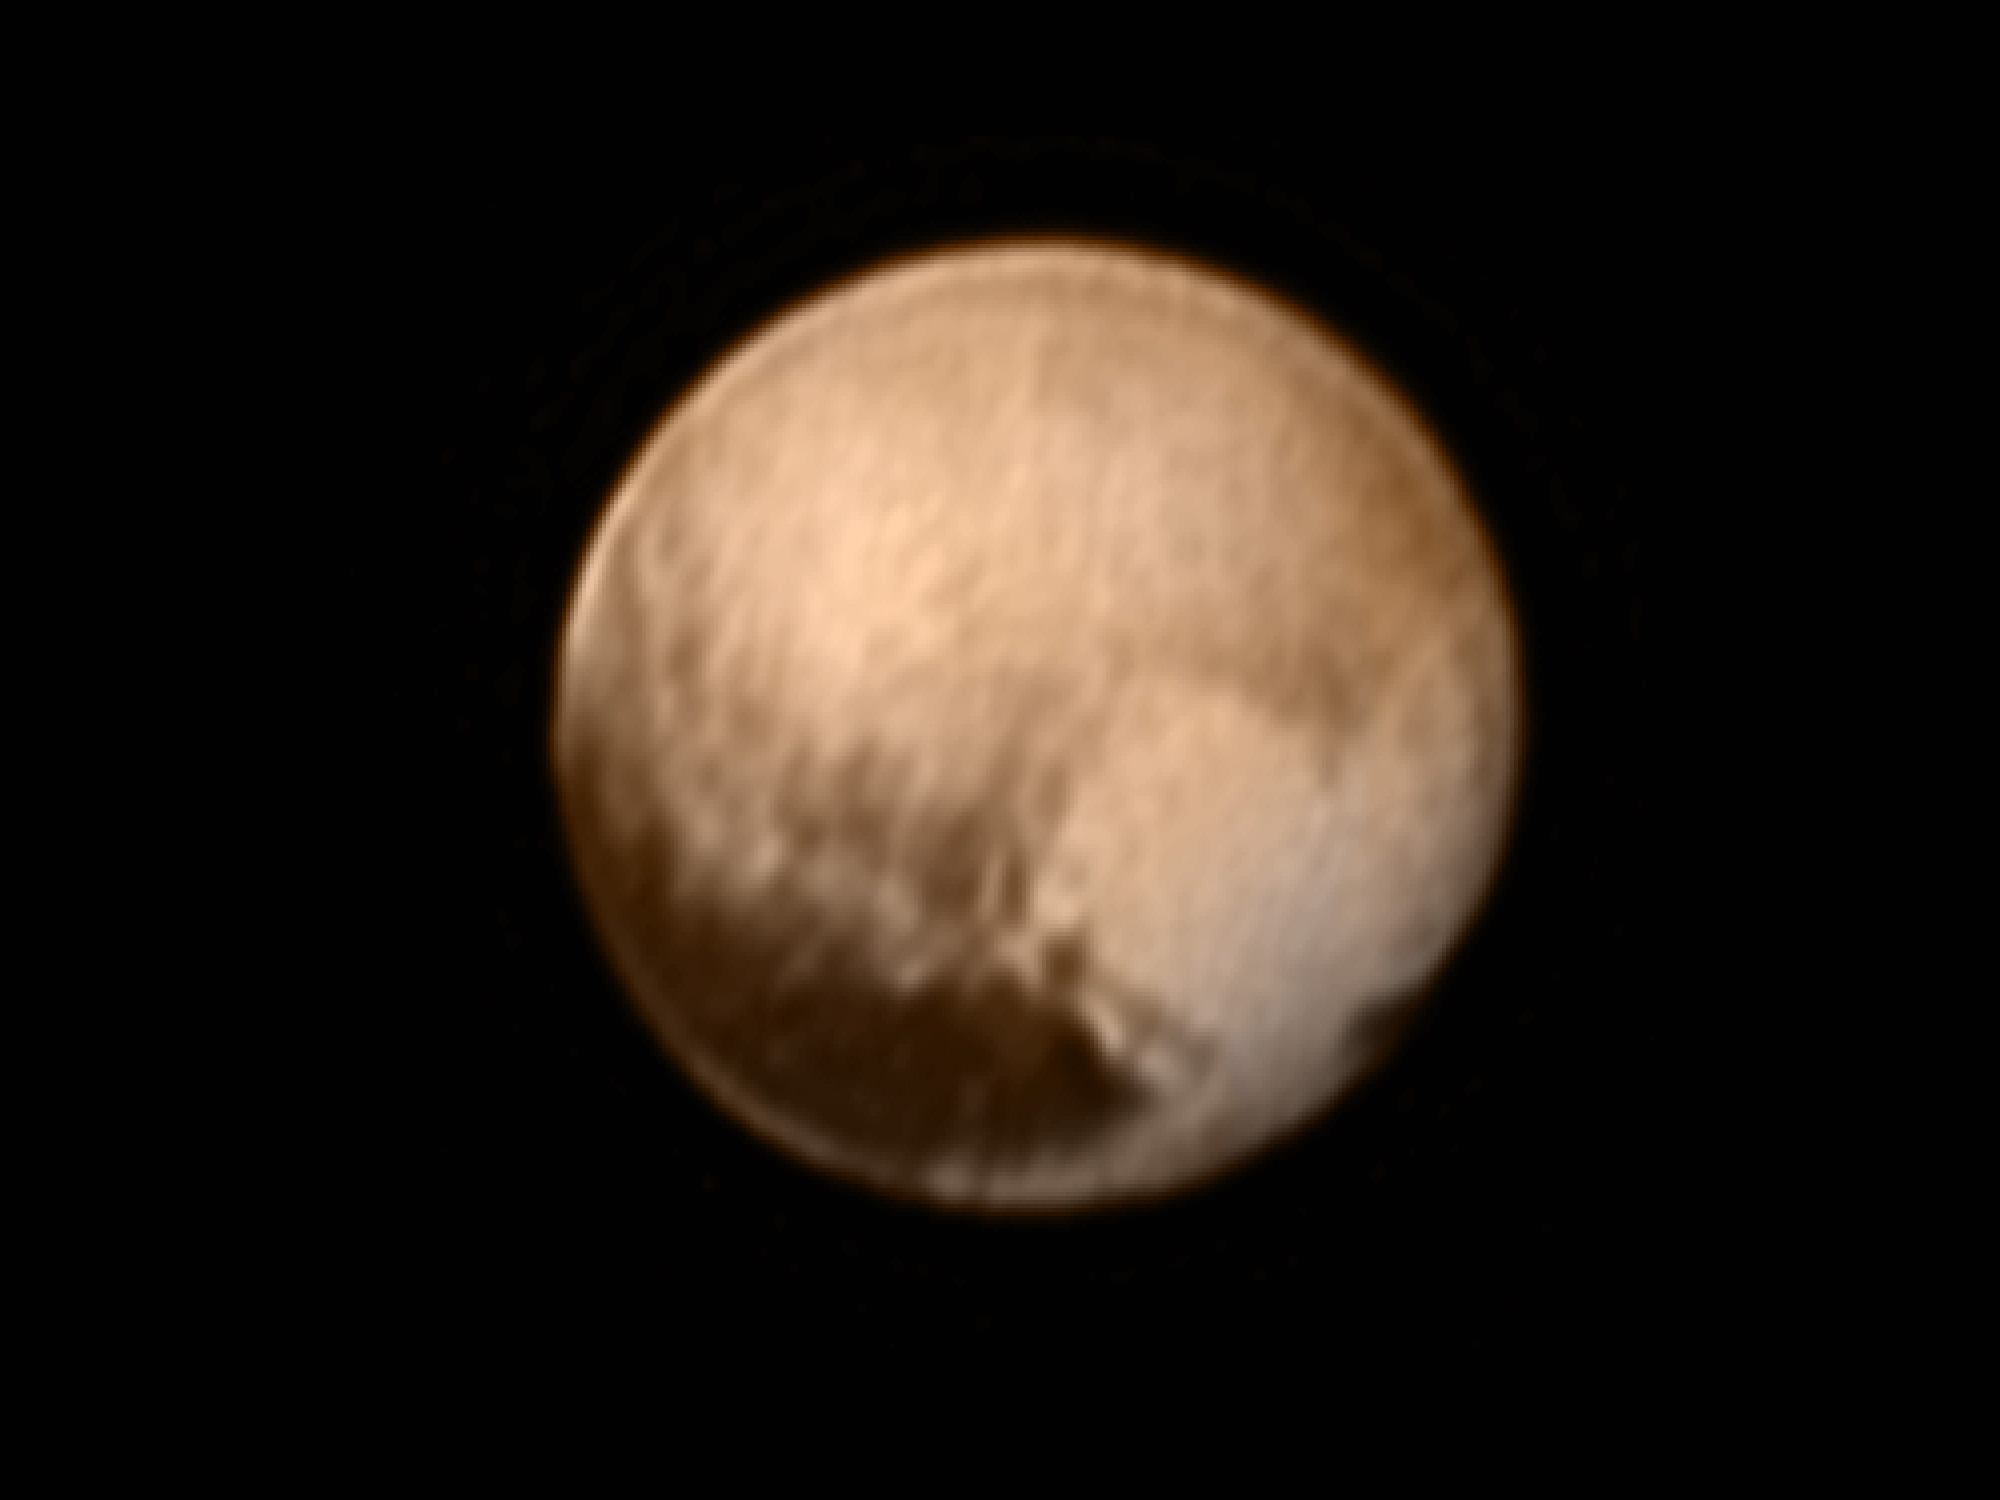 How To See If Your Name Is Going To Pluto On The New Horizons Spacecraft